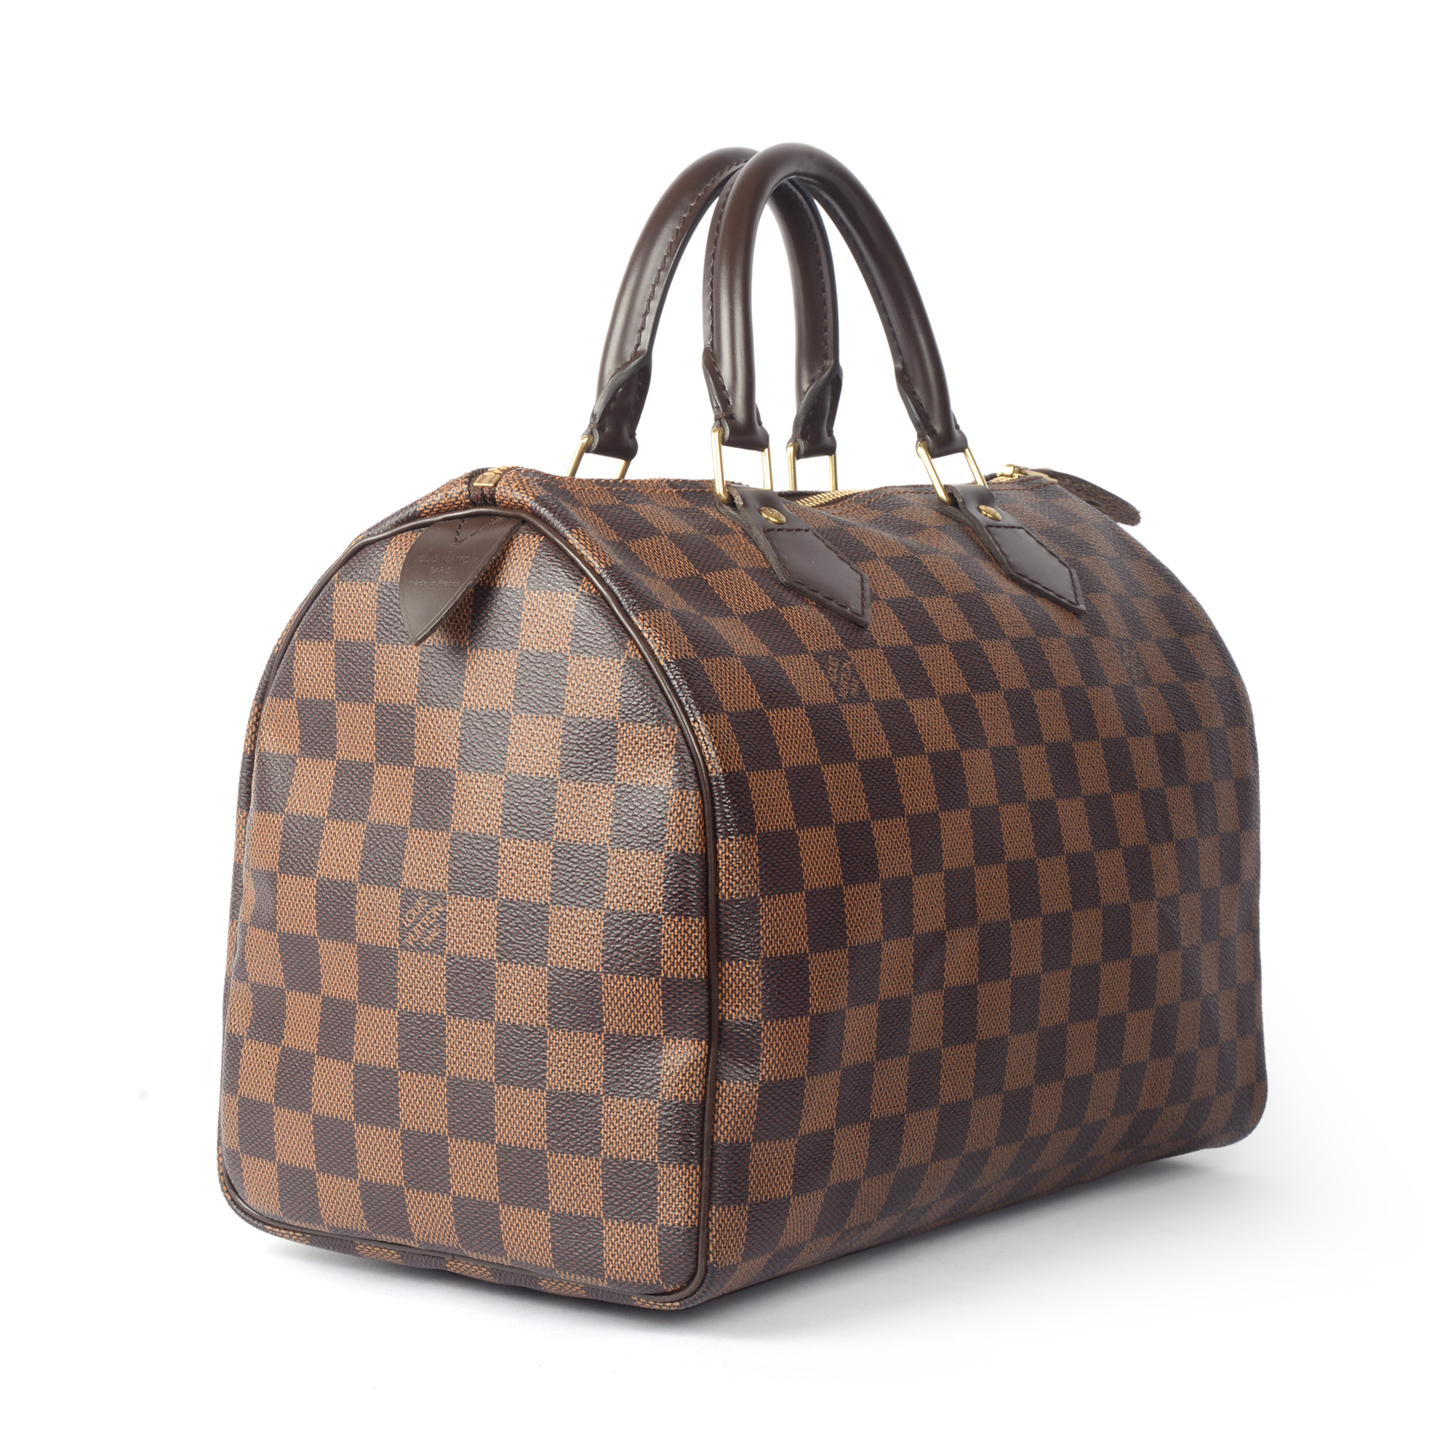 Damier Ebene Louis Vuitton Bag | Confederated Tribes of the Umatilla Indian Reservation